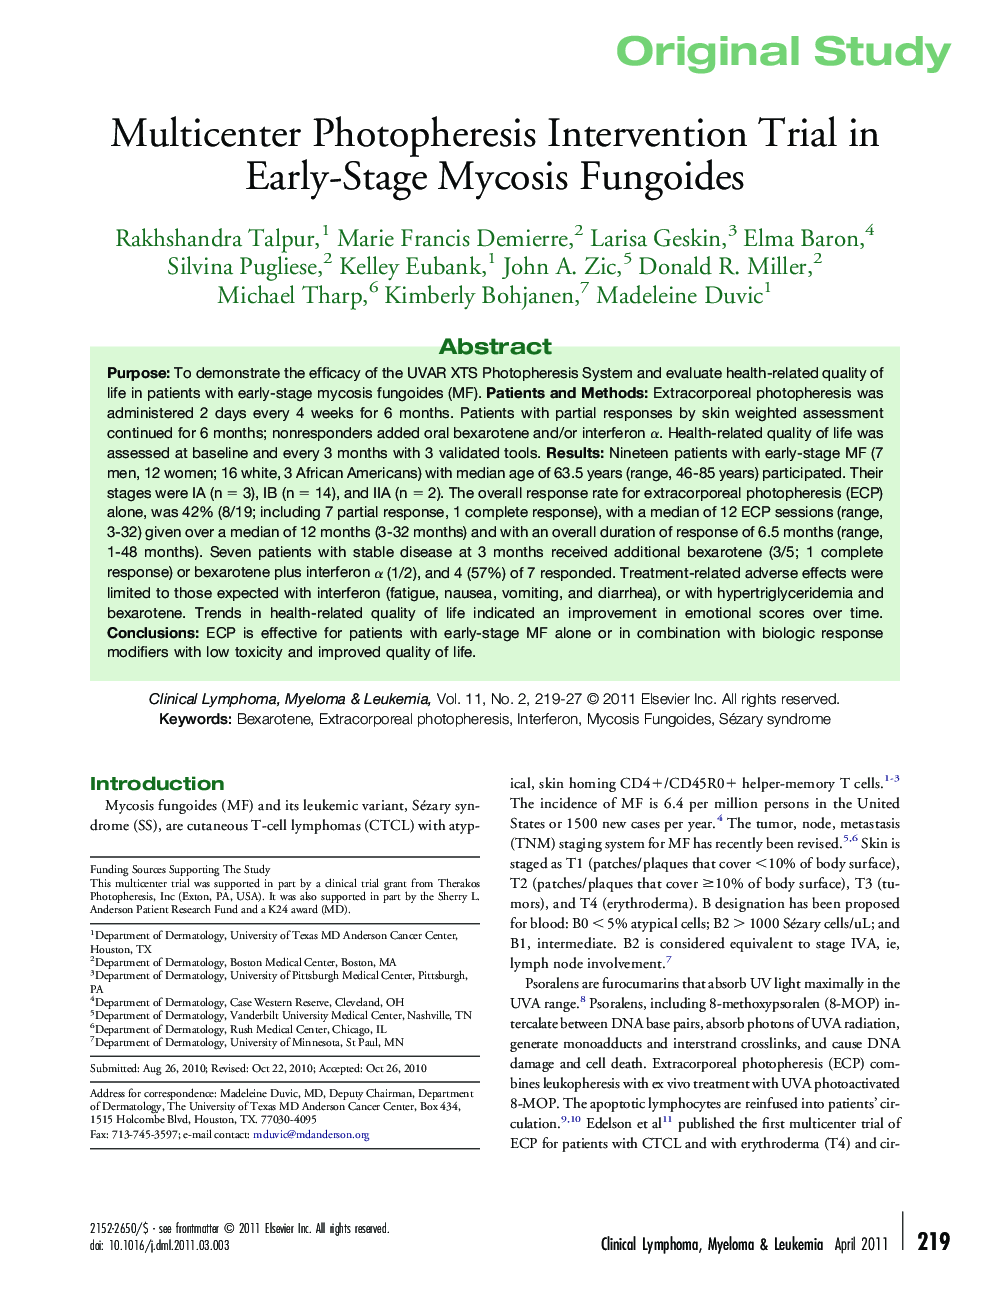 Multicenter Photopheresis Intervention Trial in Early-Stage Mycosis Fungoides 